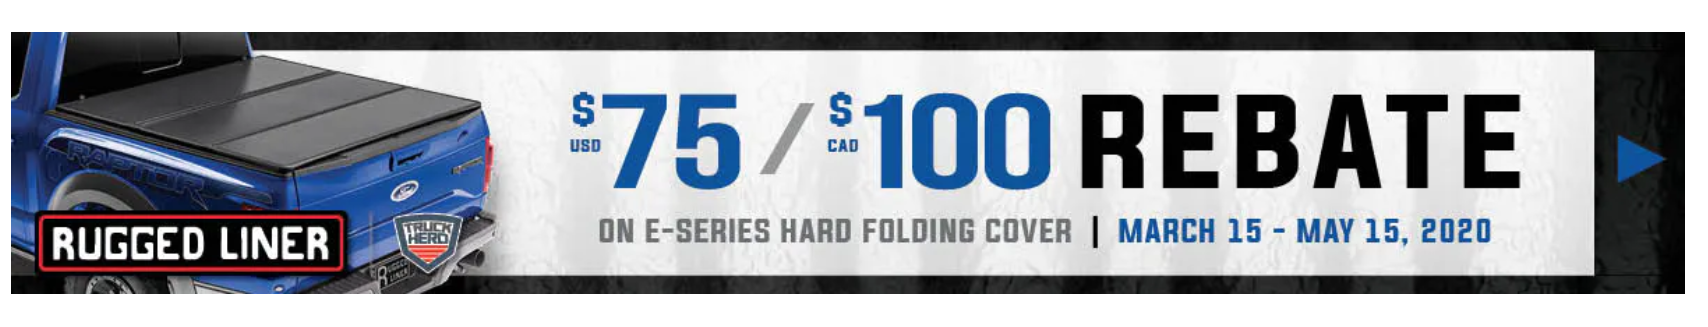 Rugged Liner: Get US$75 or CA$100 Back on E-Series Hard Folding Truck Bed Covers